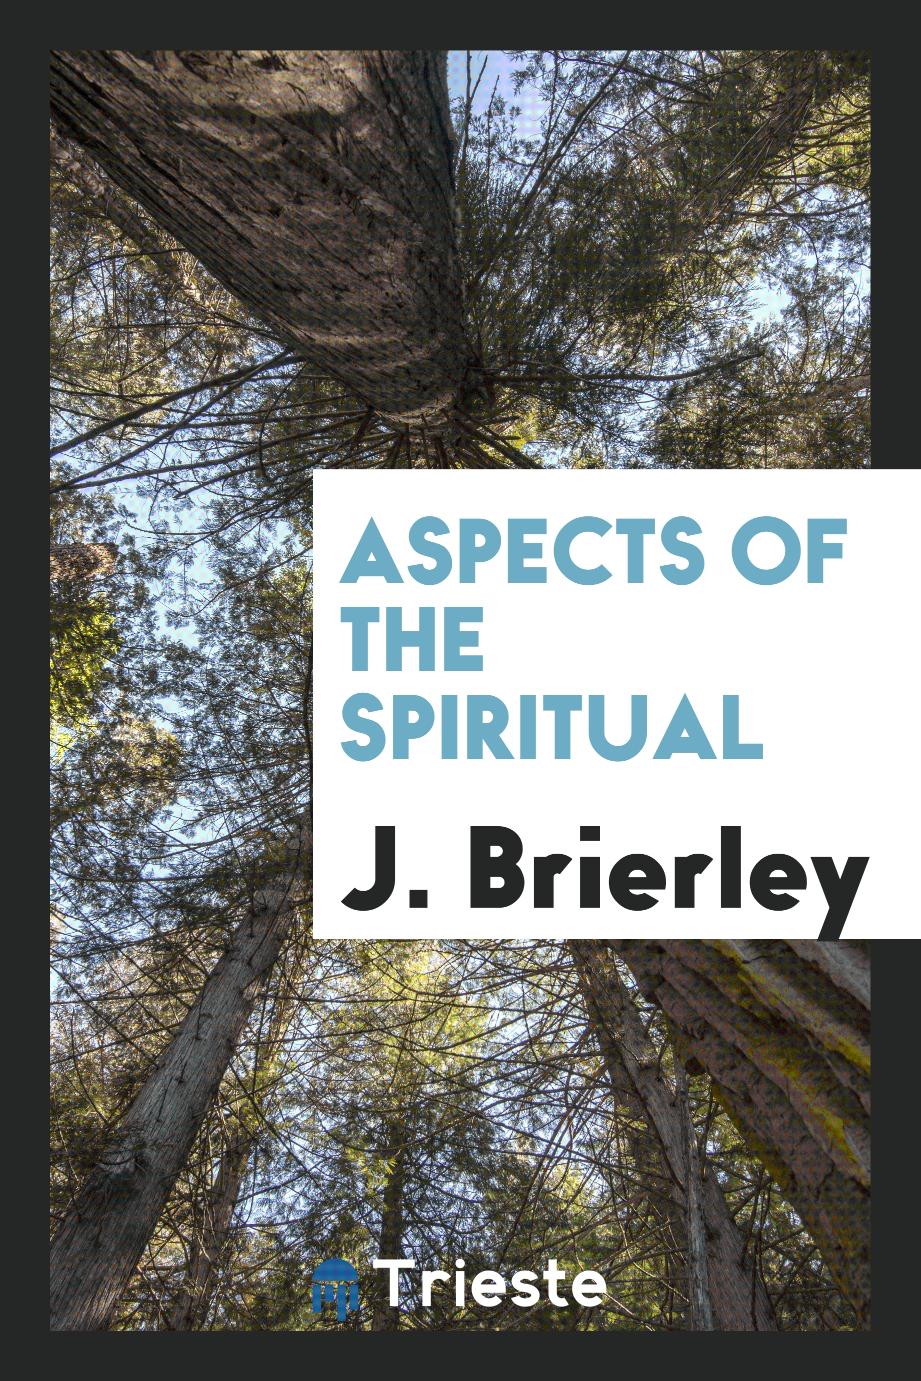 Aspects of the spiritual